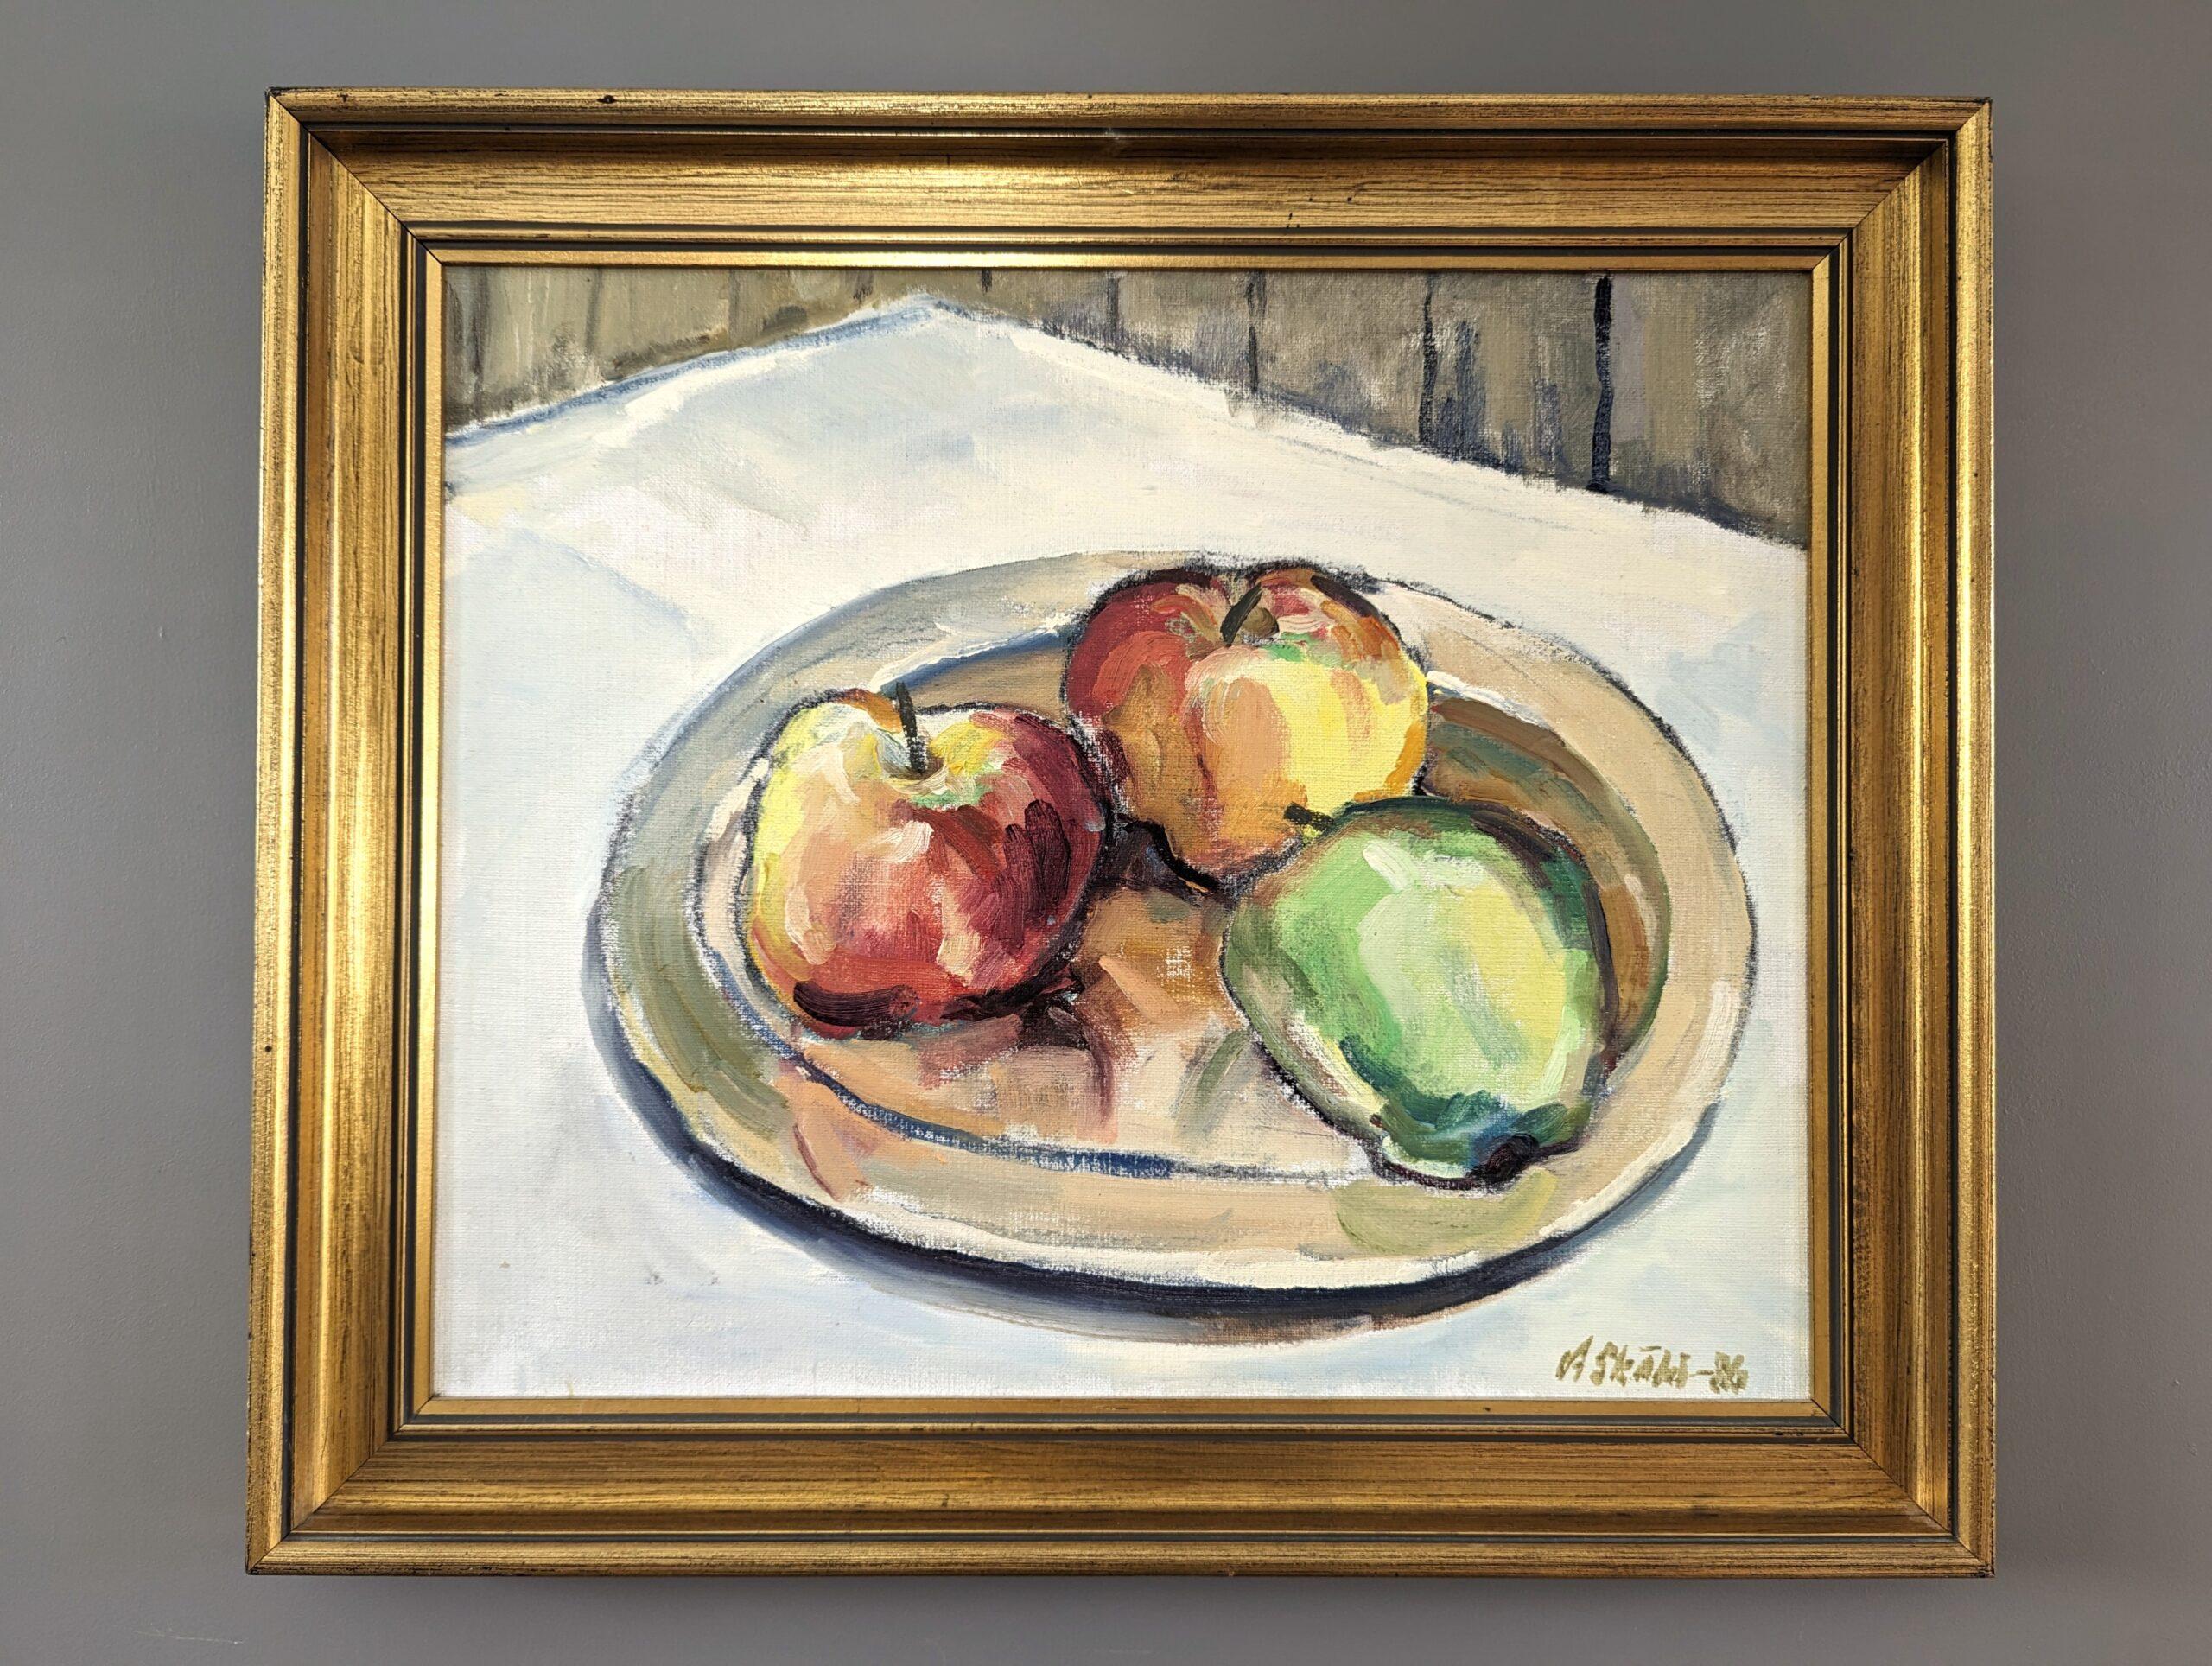 ORCHARD APPLES
Size: 46.5 x 54.5 cm (including frame)
Oil on Canvas

A very skilfully executed modernist still life composition in oil, painted onto canvas and dated 1986.

In this picture, 3 apples sit on a saucer on a white surface, with  a